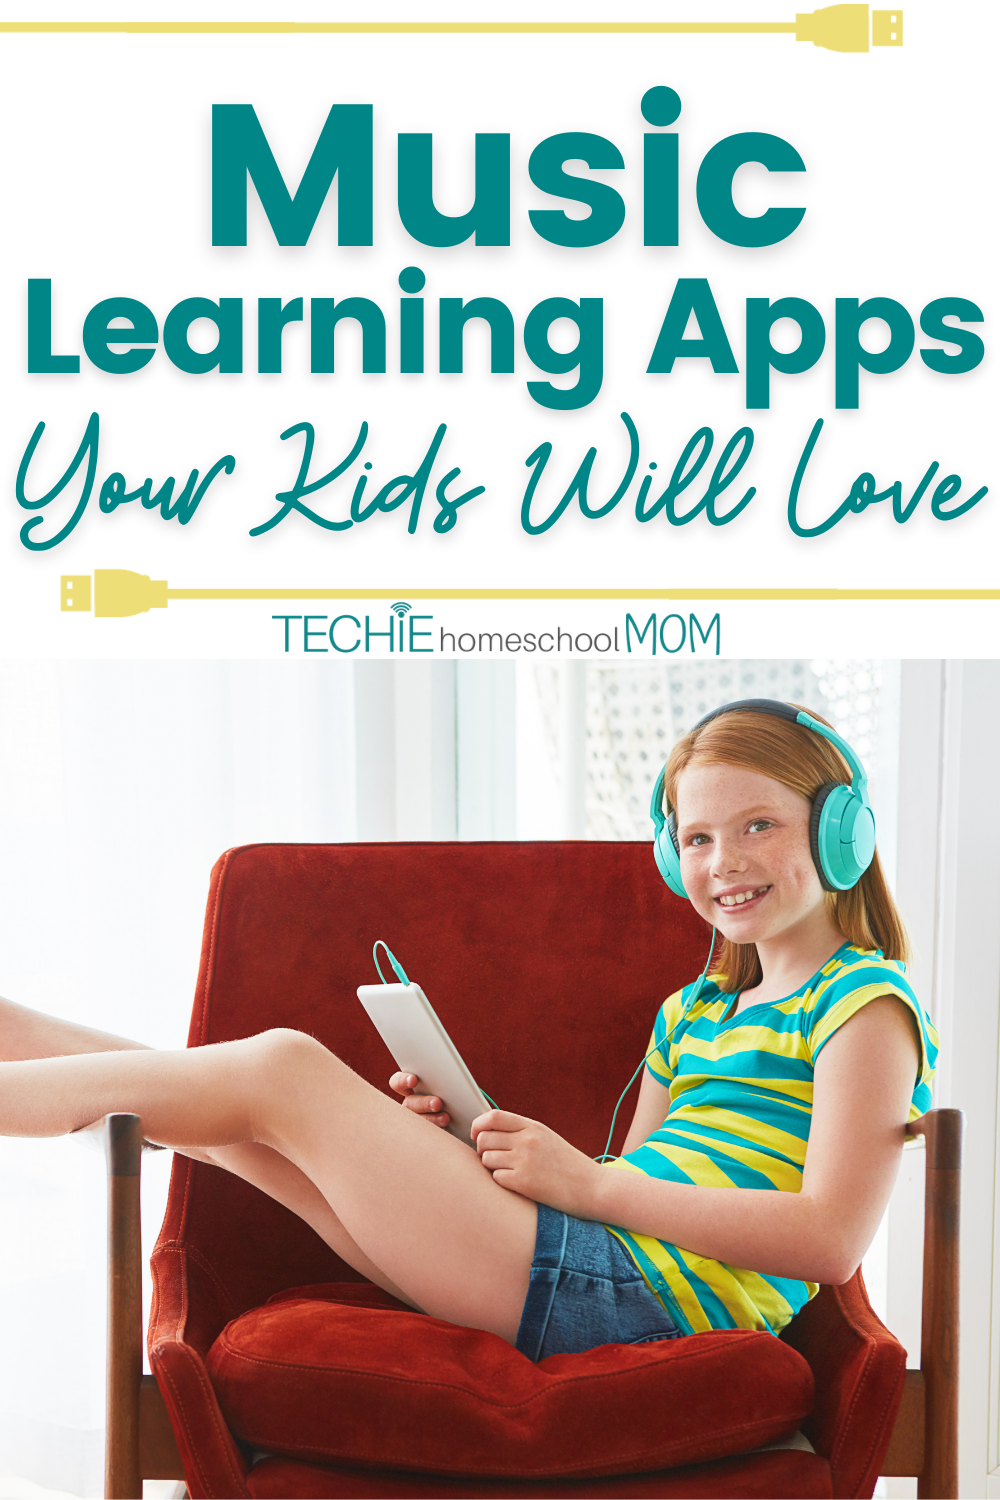 Take your kids' music education up a notch with these fun apps that teach about music.